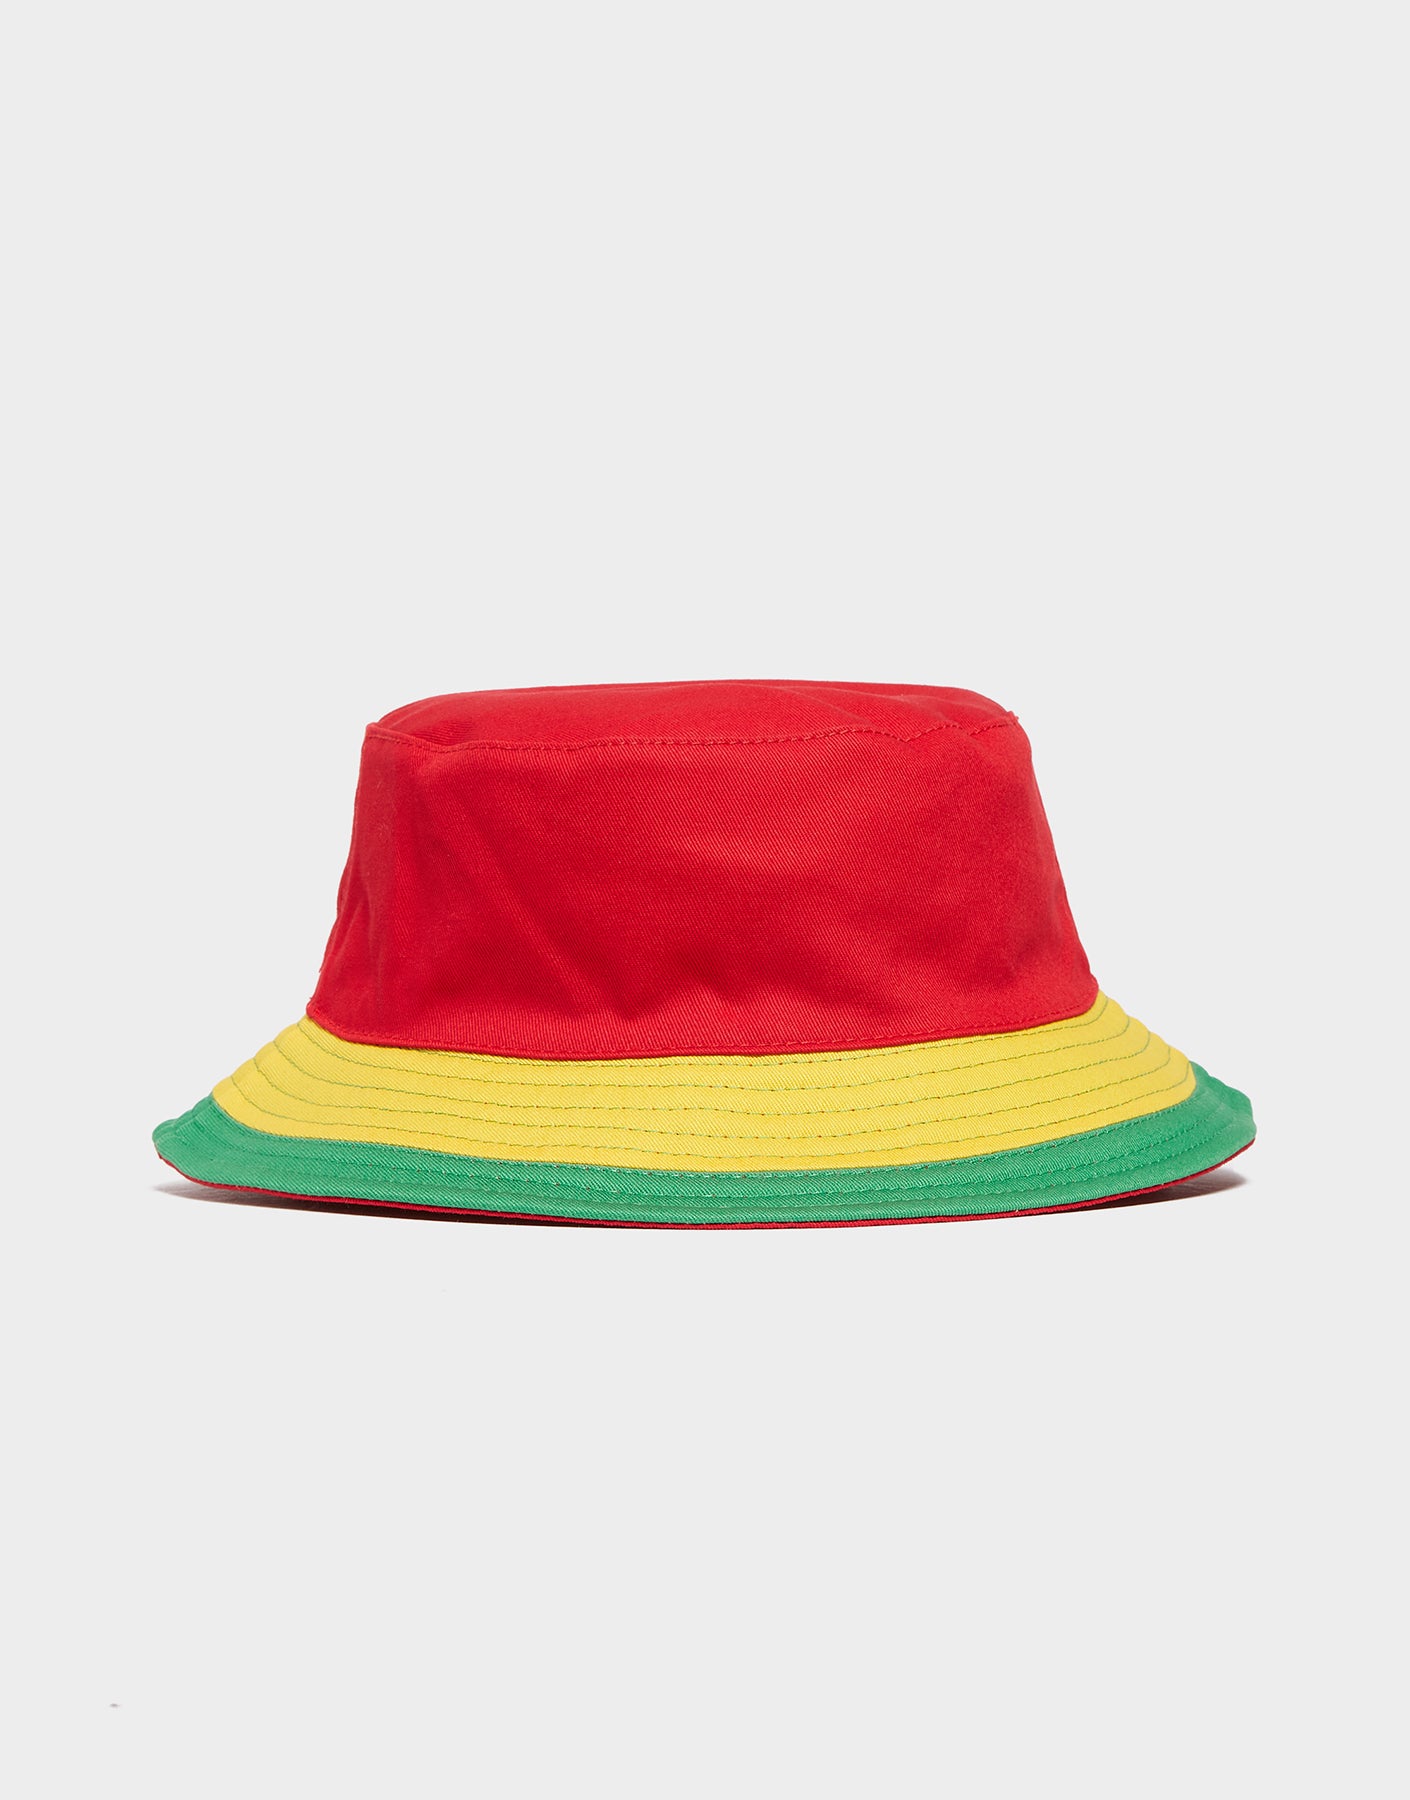 Official Team Wales Reversible Bucket Hat - The World Football Store